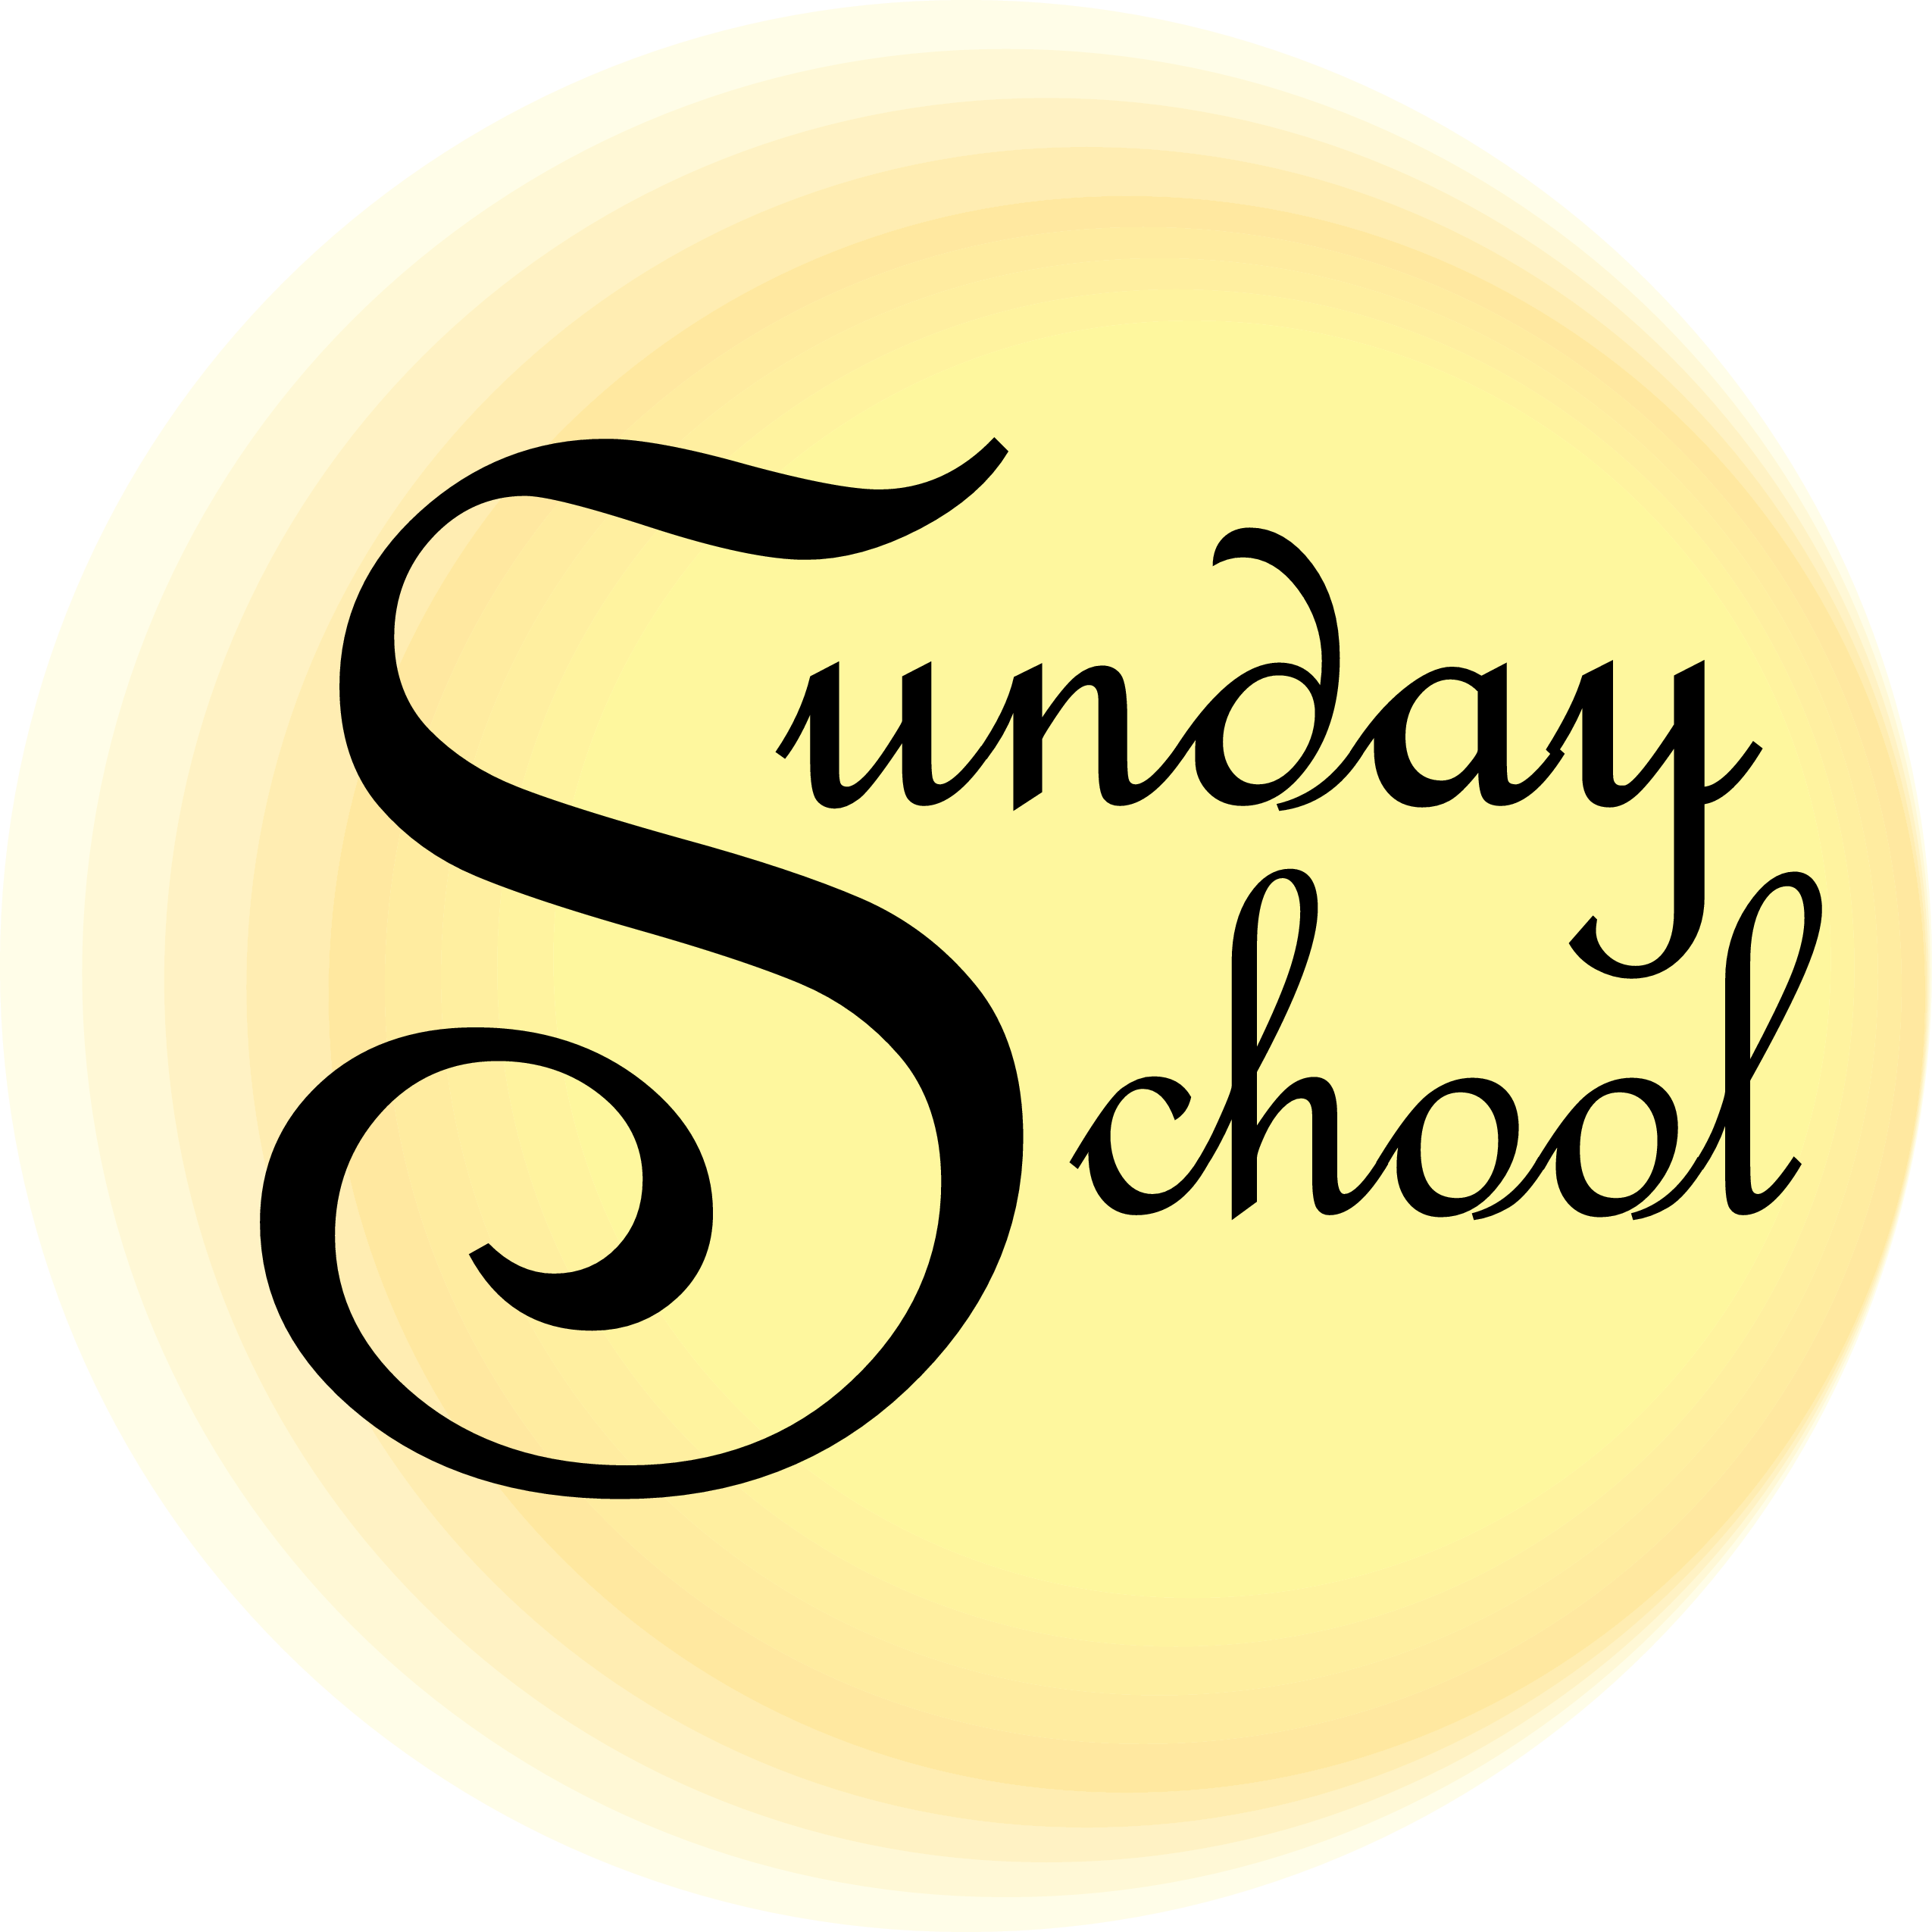 Free Sunday School Clipart Black And White, Download Free Sunday School Clipart Black And White png image, Free ClipArts on Clipart Library